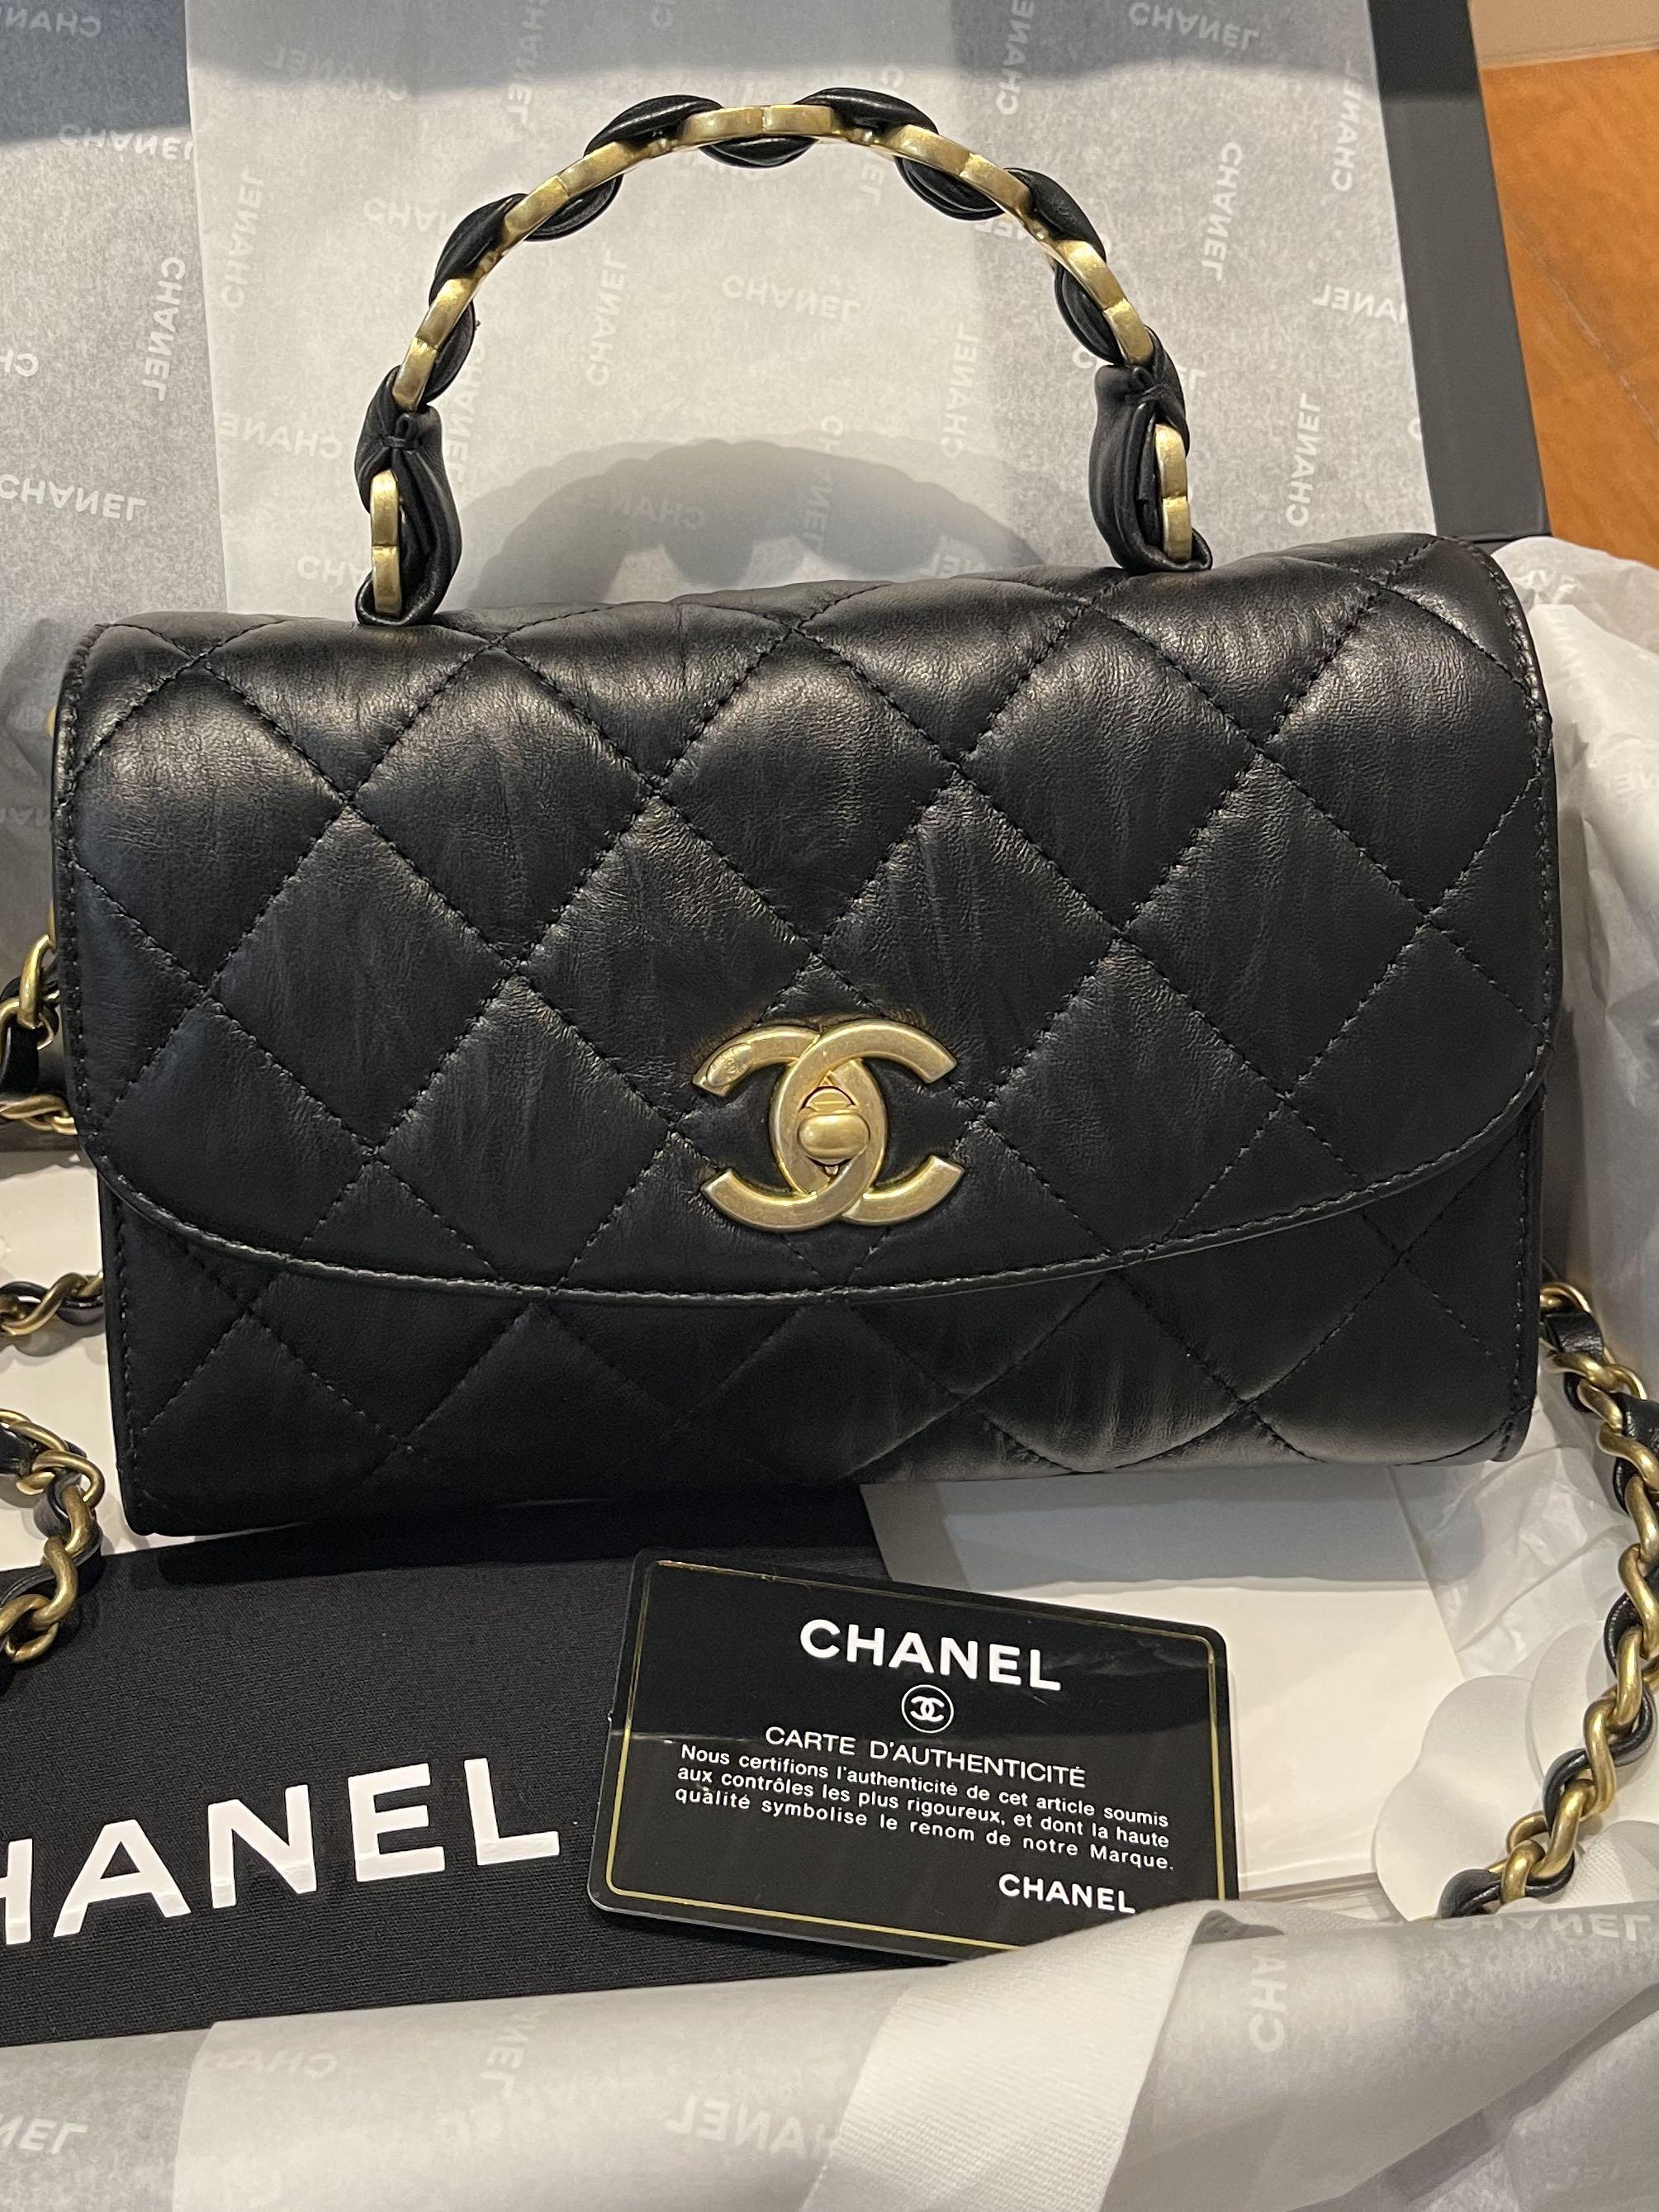 CHANEL 22S QUILTED LAMBSKIN HEART PUPLE LARGE BAG 100% AUTHENTIC